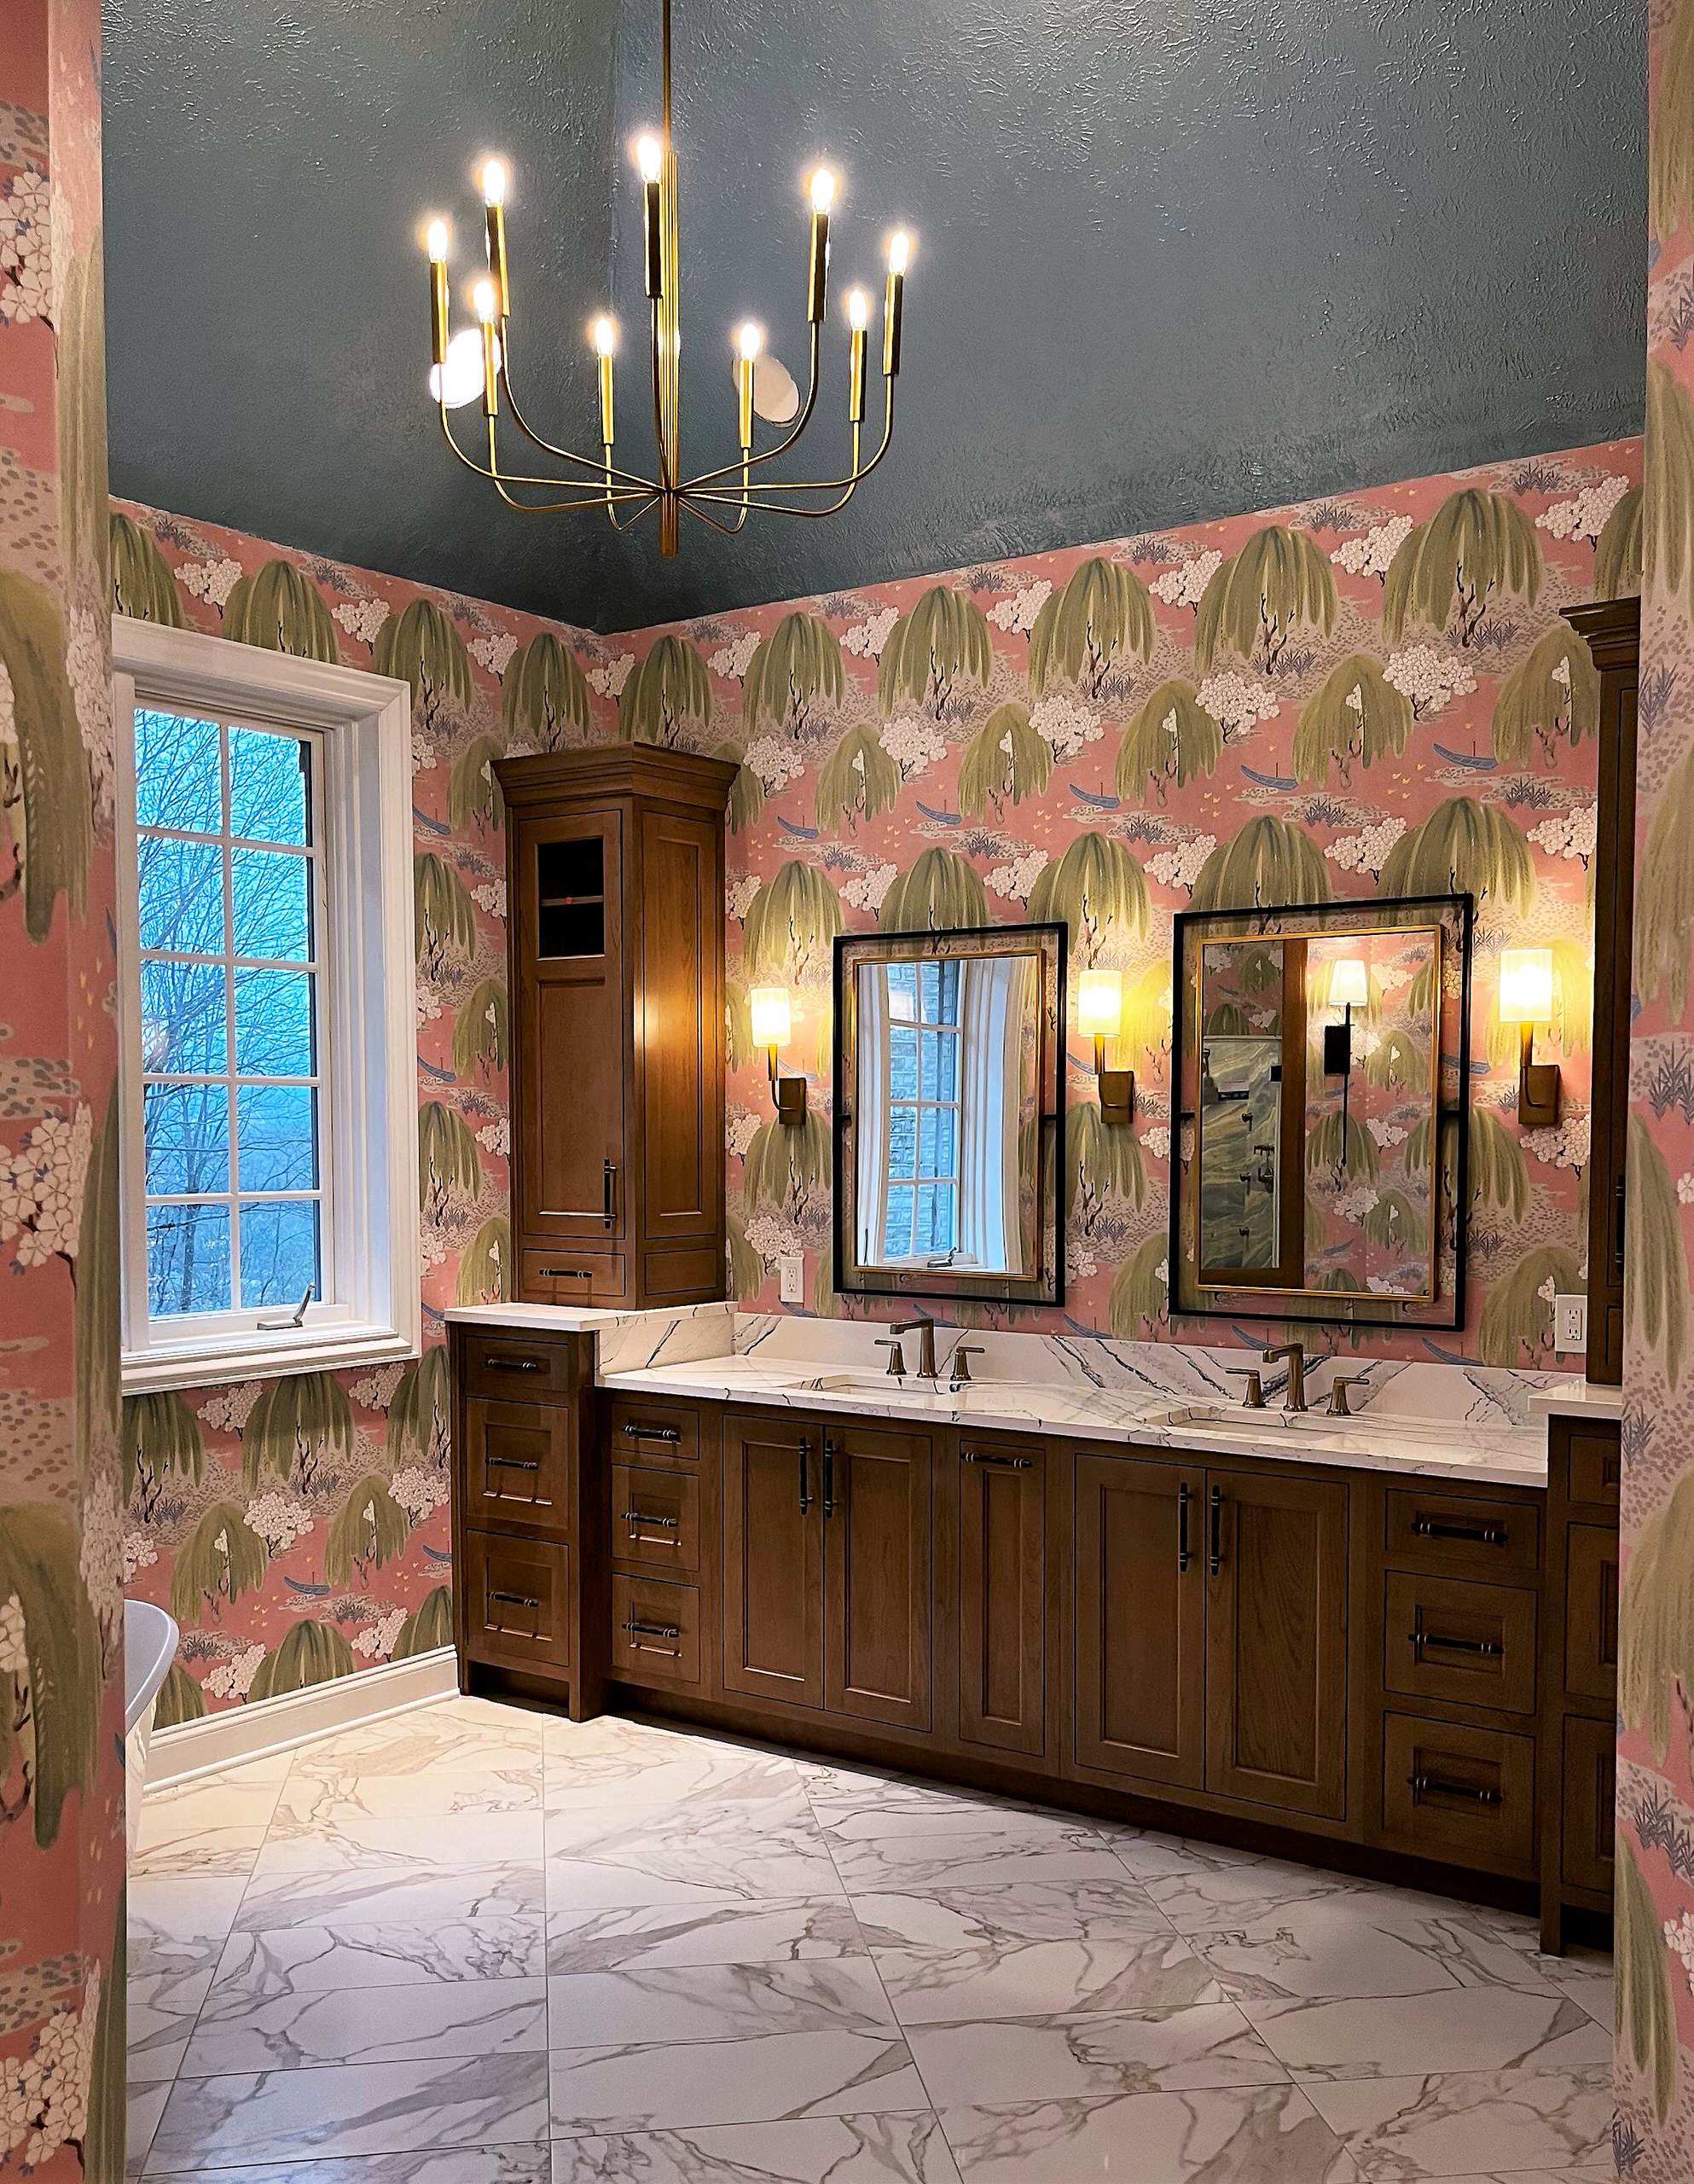 Royal treatment - One-of-a-kind Primary Bathroom renovation!